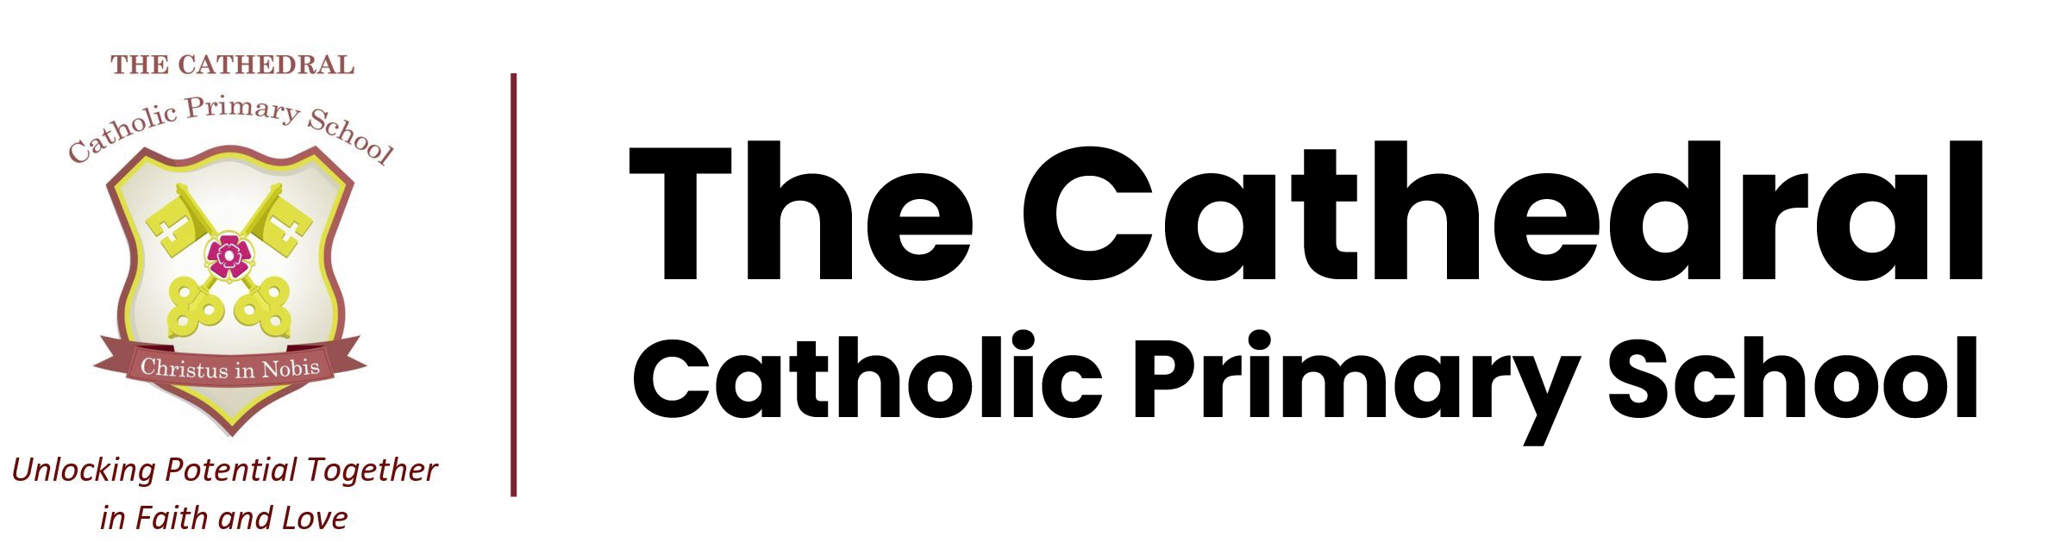 The Cathedral Catholic Primary School